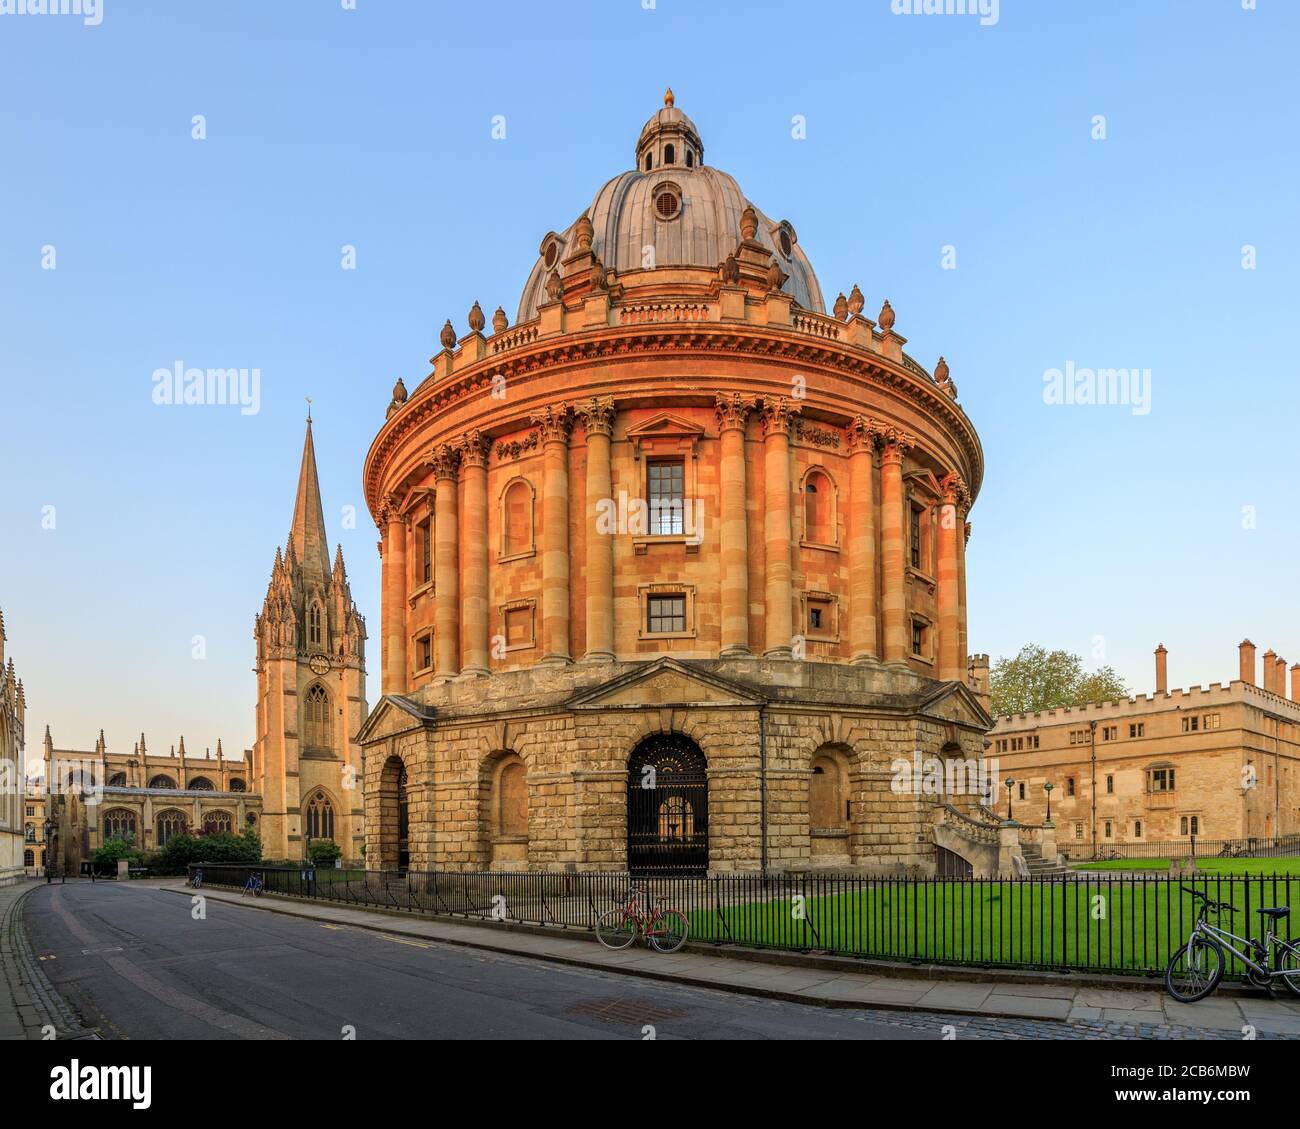 The Radcliffe Camera in Oxford at sunrise with no people around, early in the morning on a clear day with blue sky. Oxford, England, UK. Stock Photo